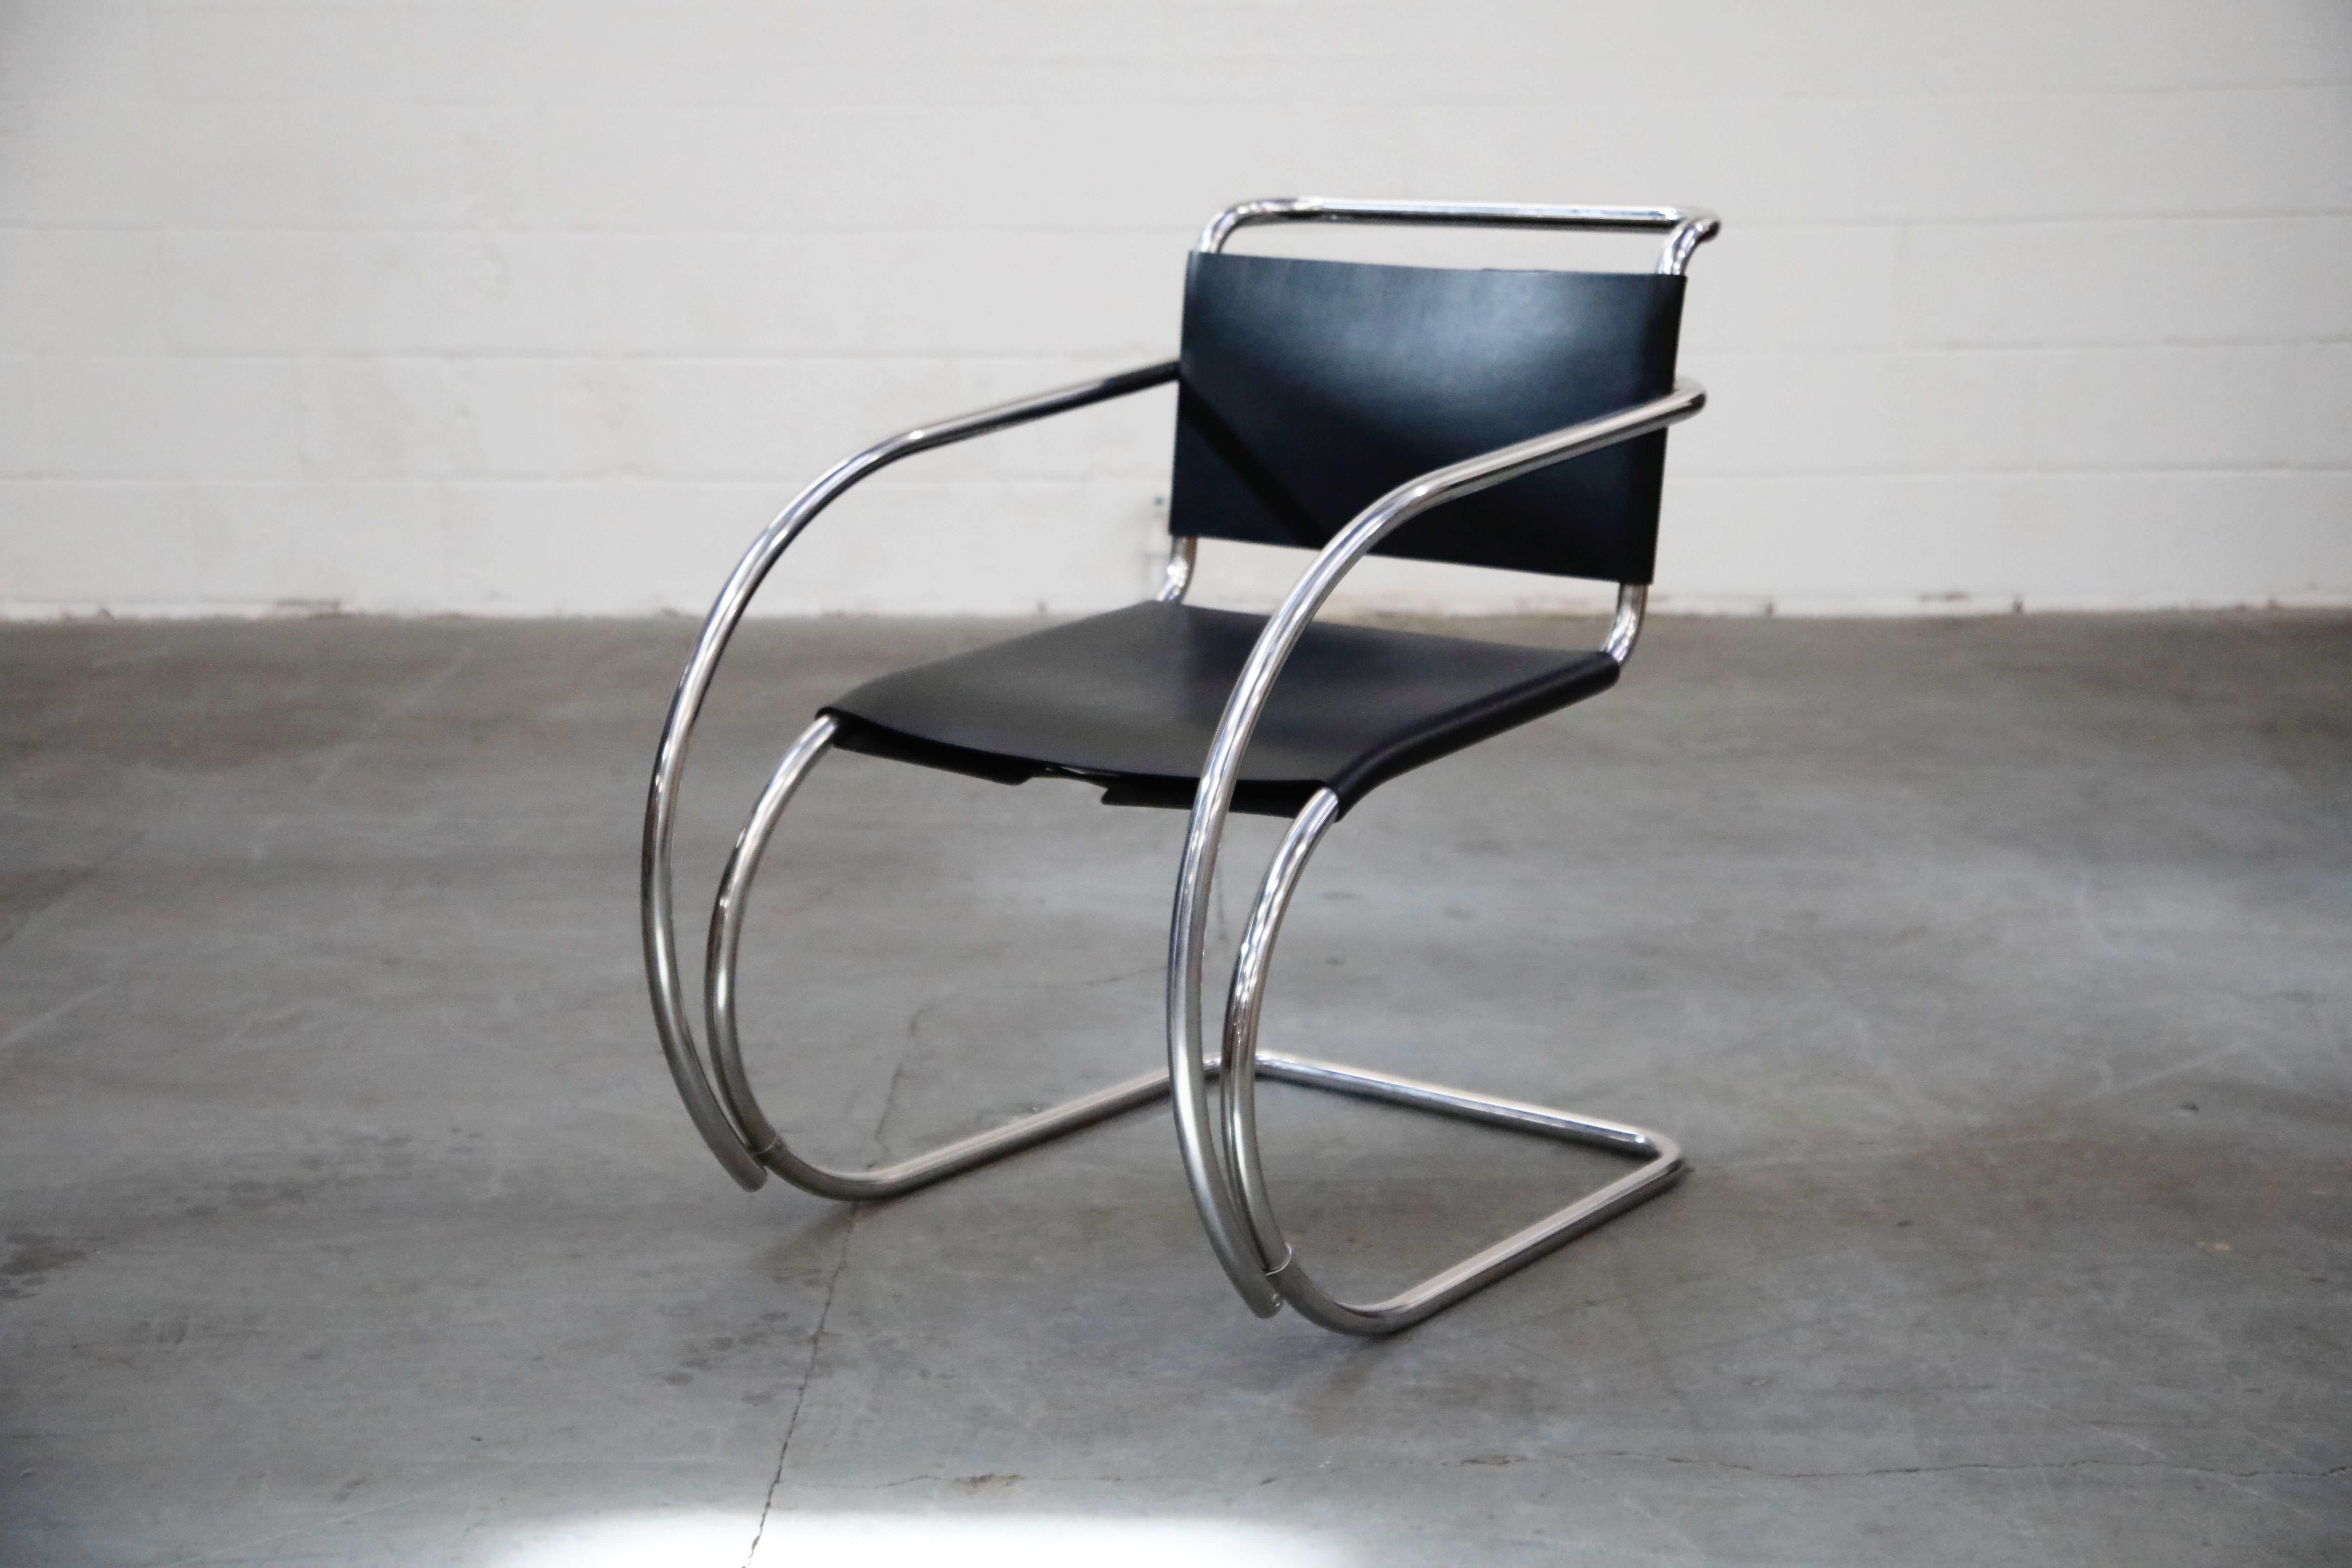 Mid-Century Modern Pair of MR20 Armchairs by Ludwig Mies van der Rohe for Knoll Studio, Signed